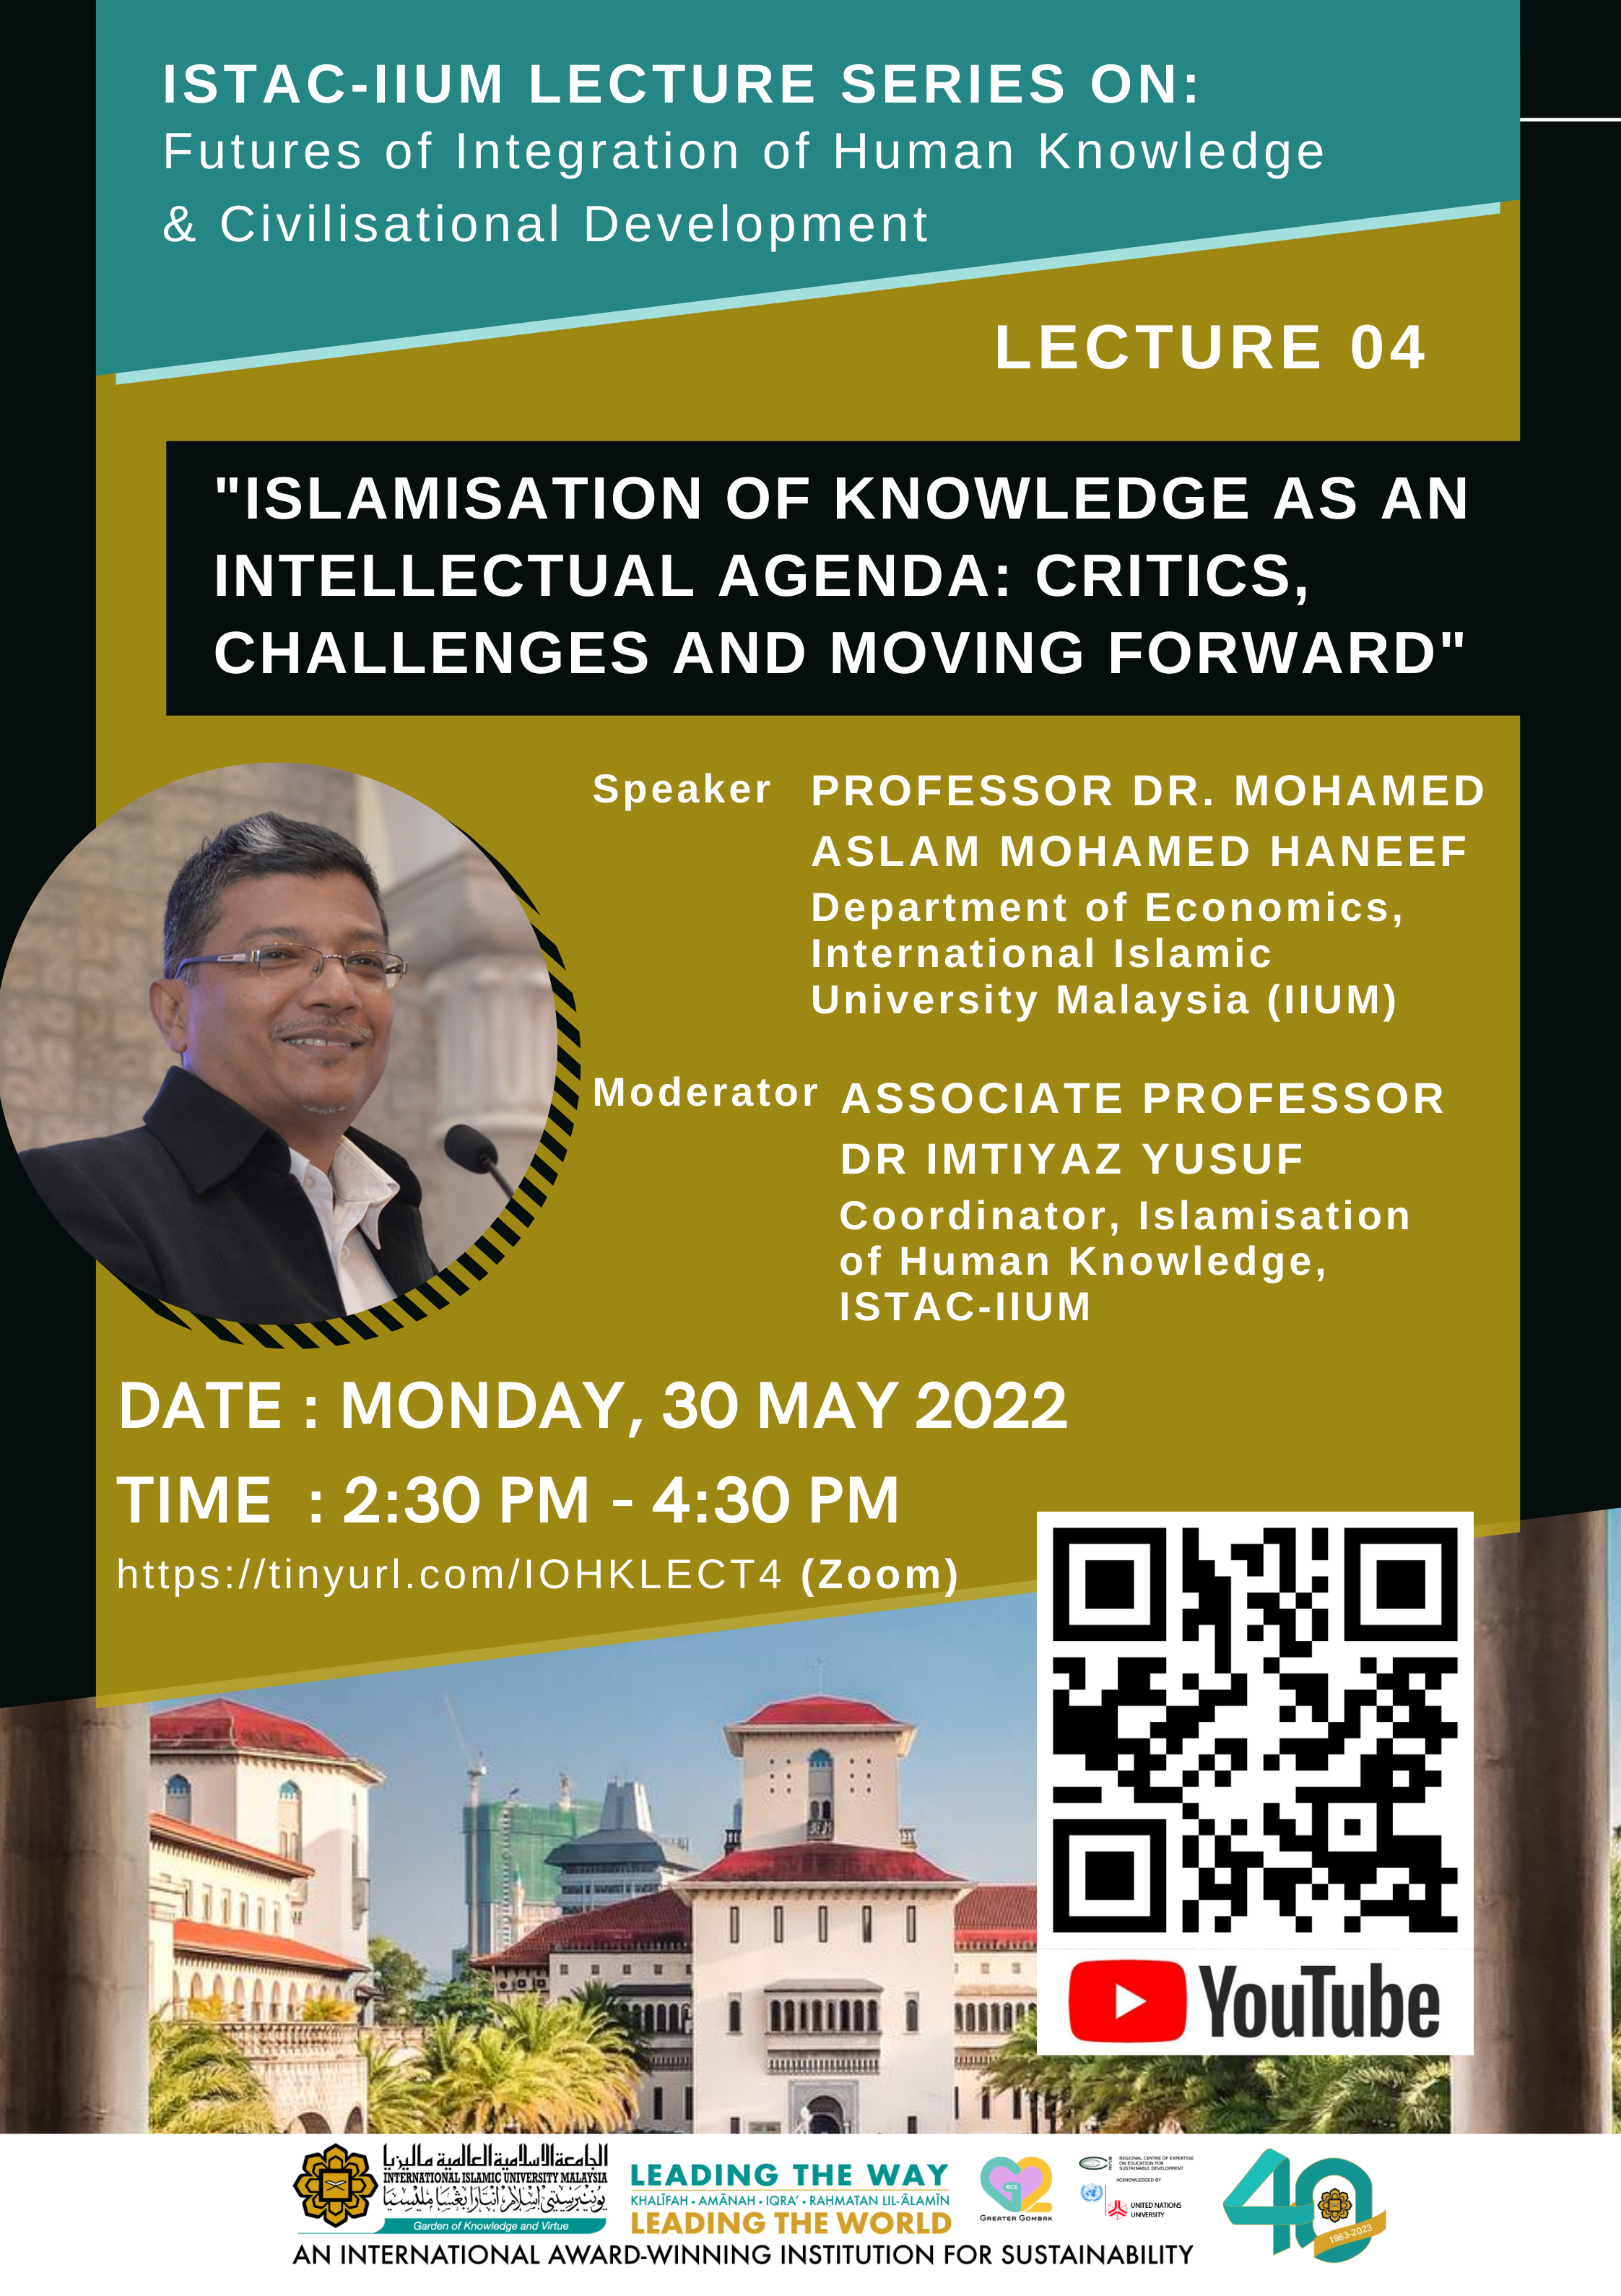 ISTAC-IIUM  LECTURE SERIES 04:  ON FUTURES OF INTEGRATION OF HUMAN KNOWLEDGE & CIVILISATIONAL DEVELOPMENT